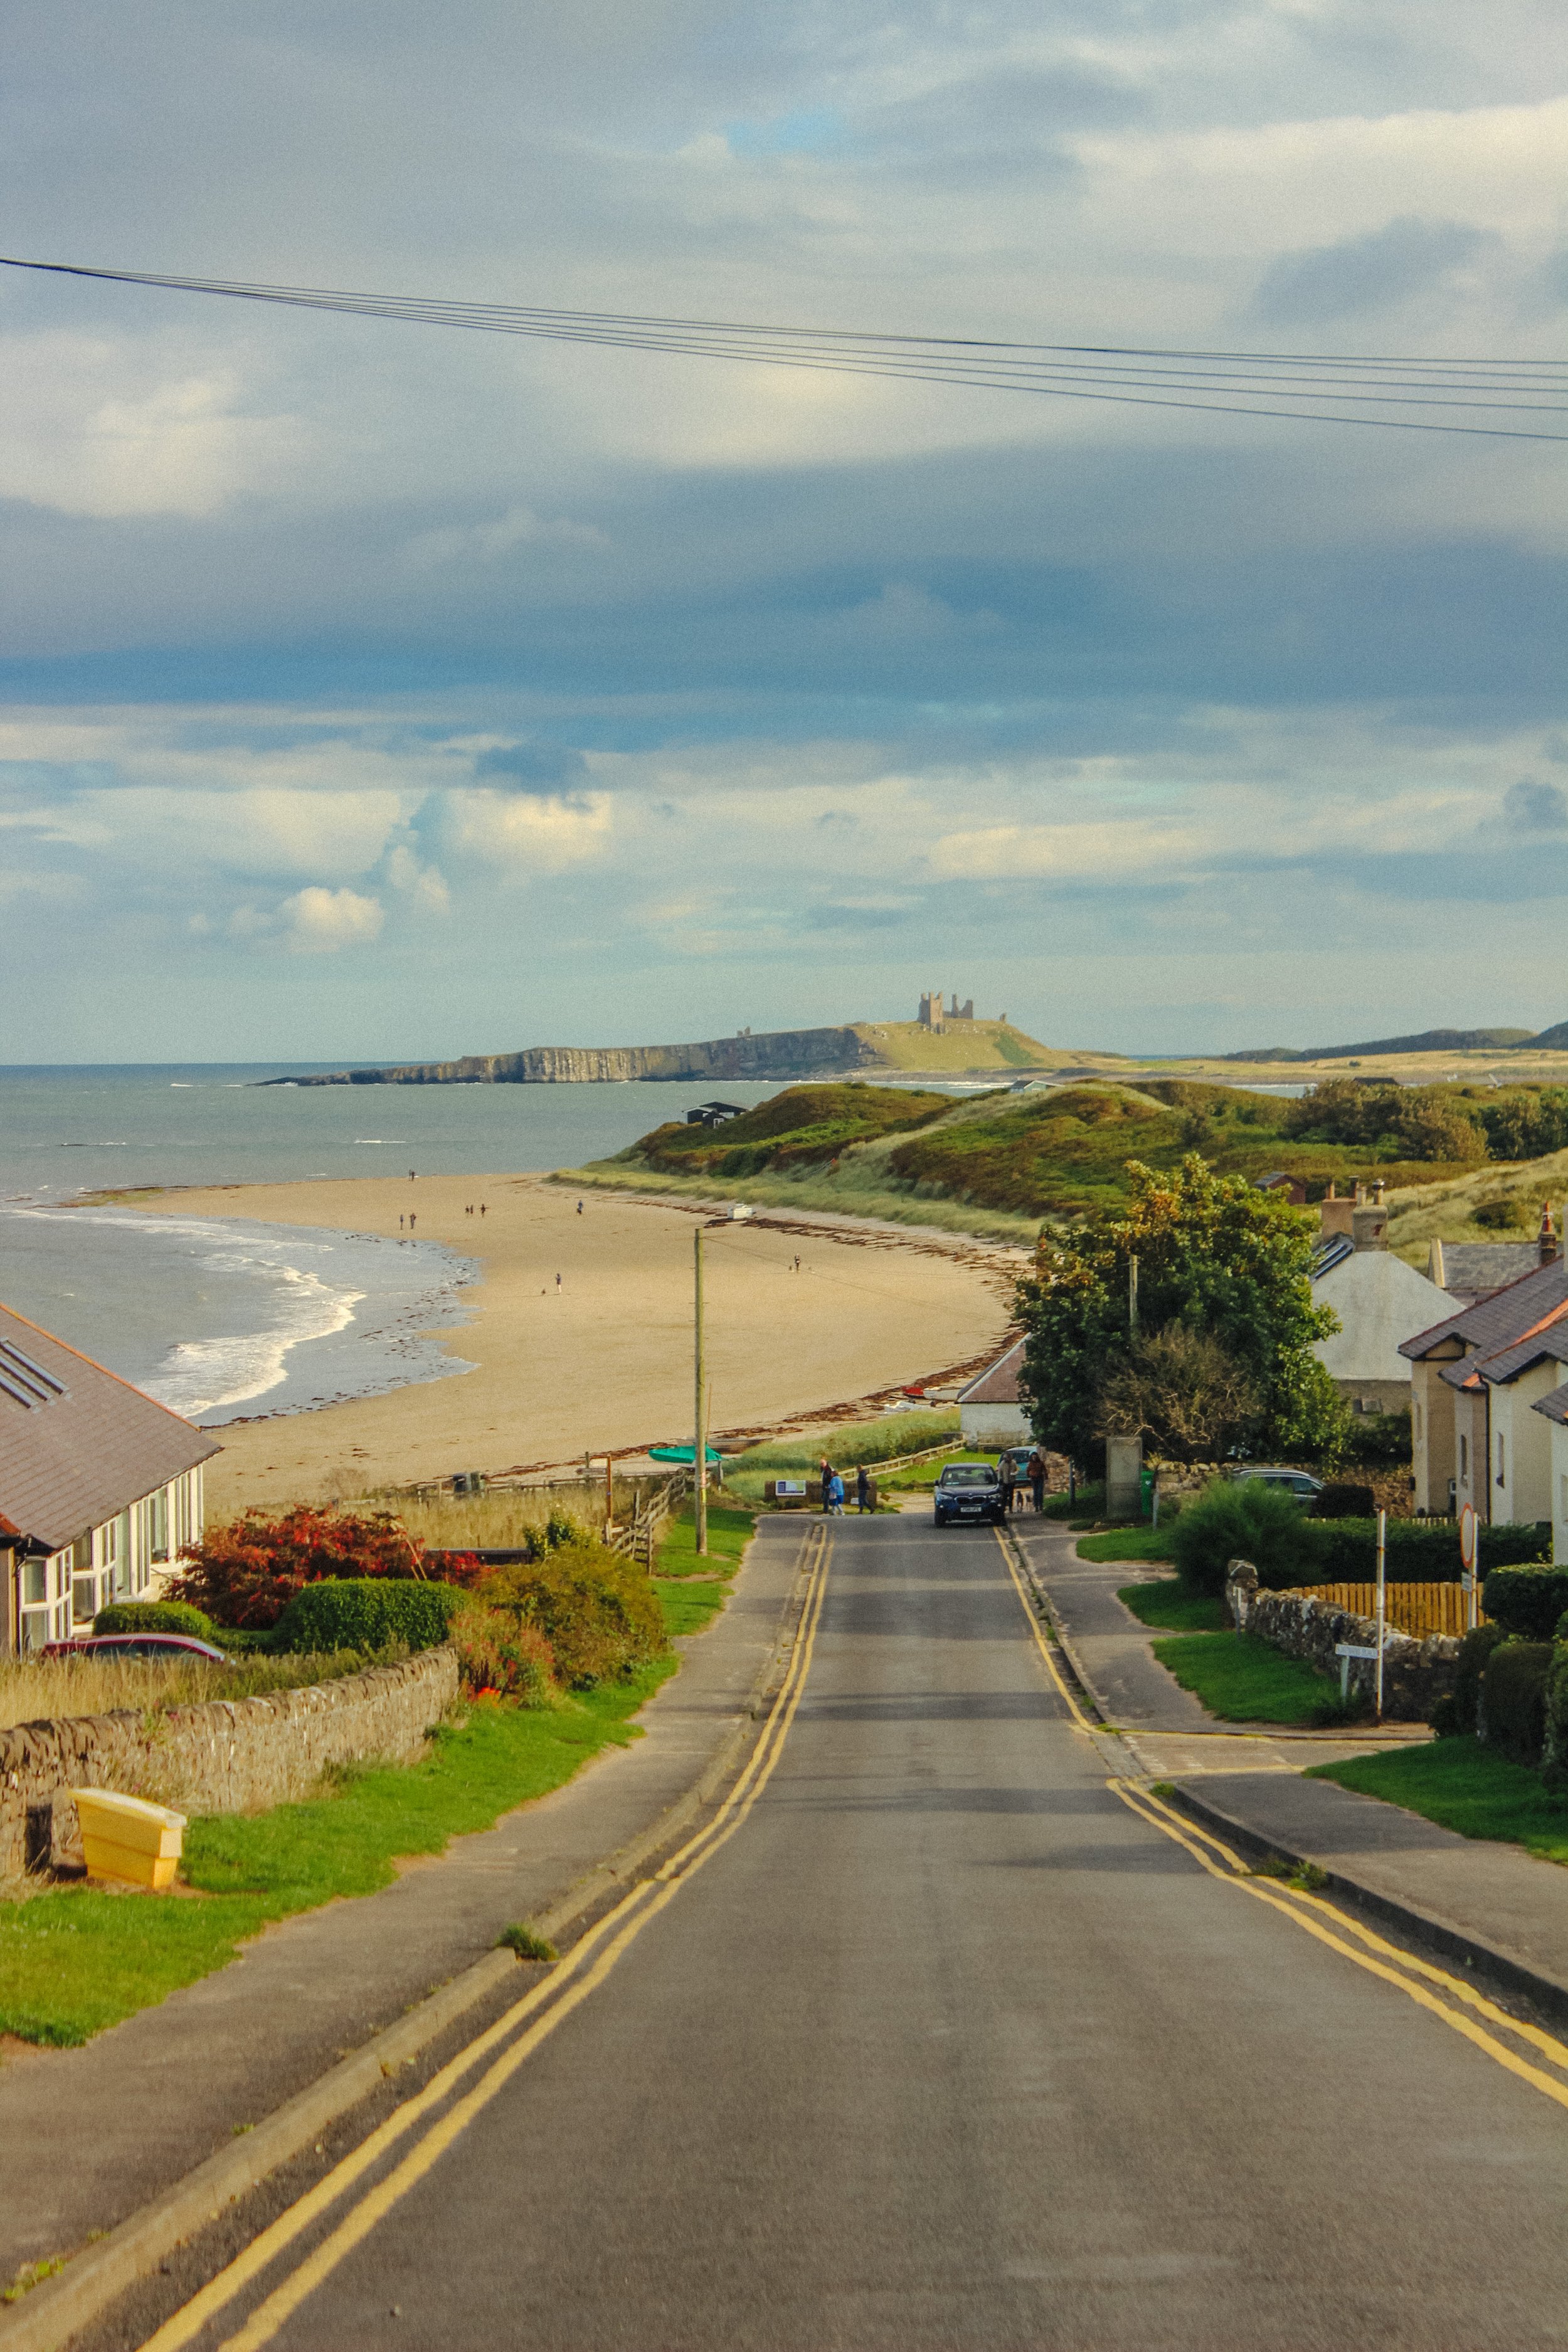 21 photos to inspire you to visit Northumberland-16.jpg